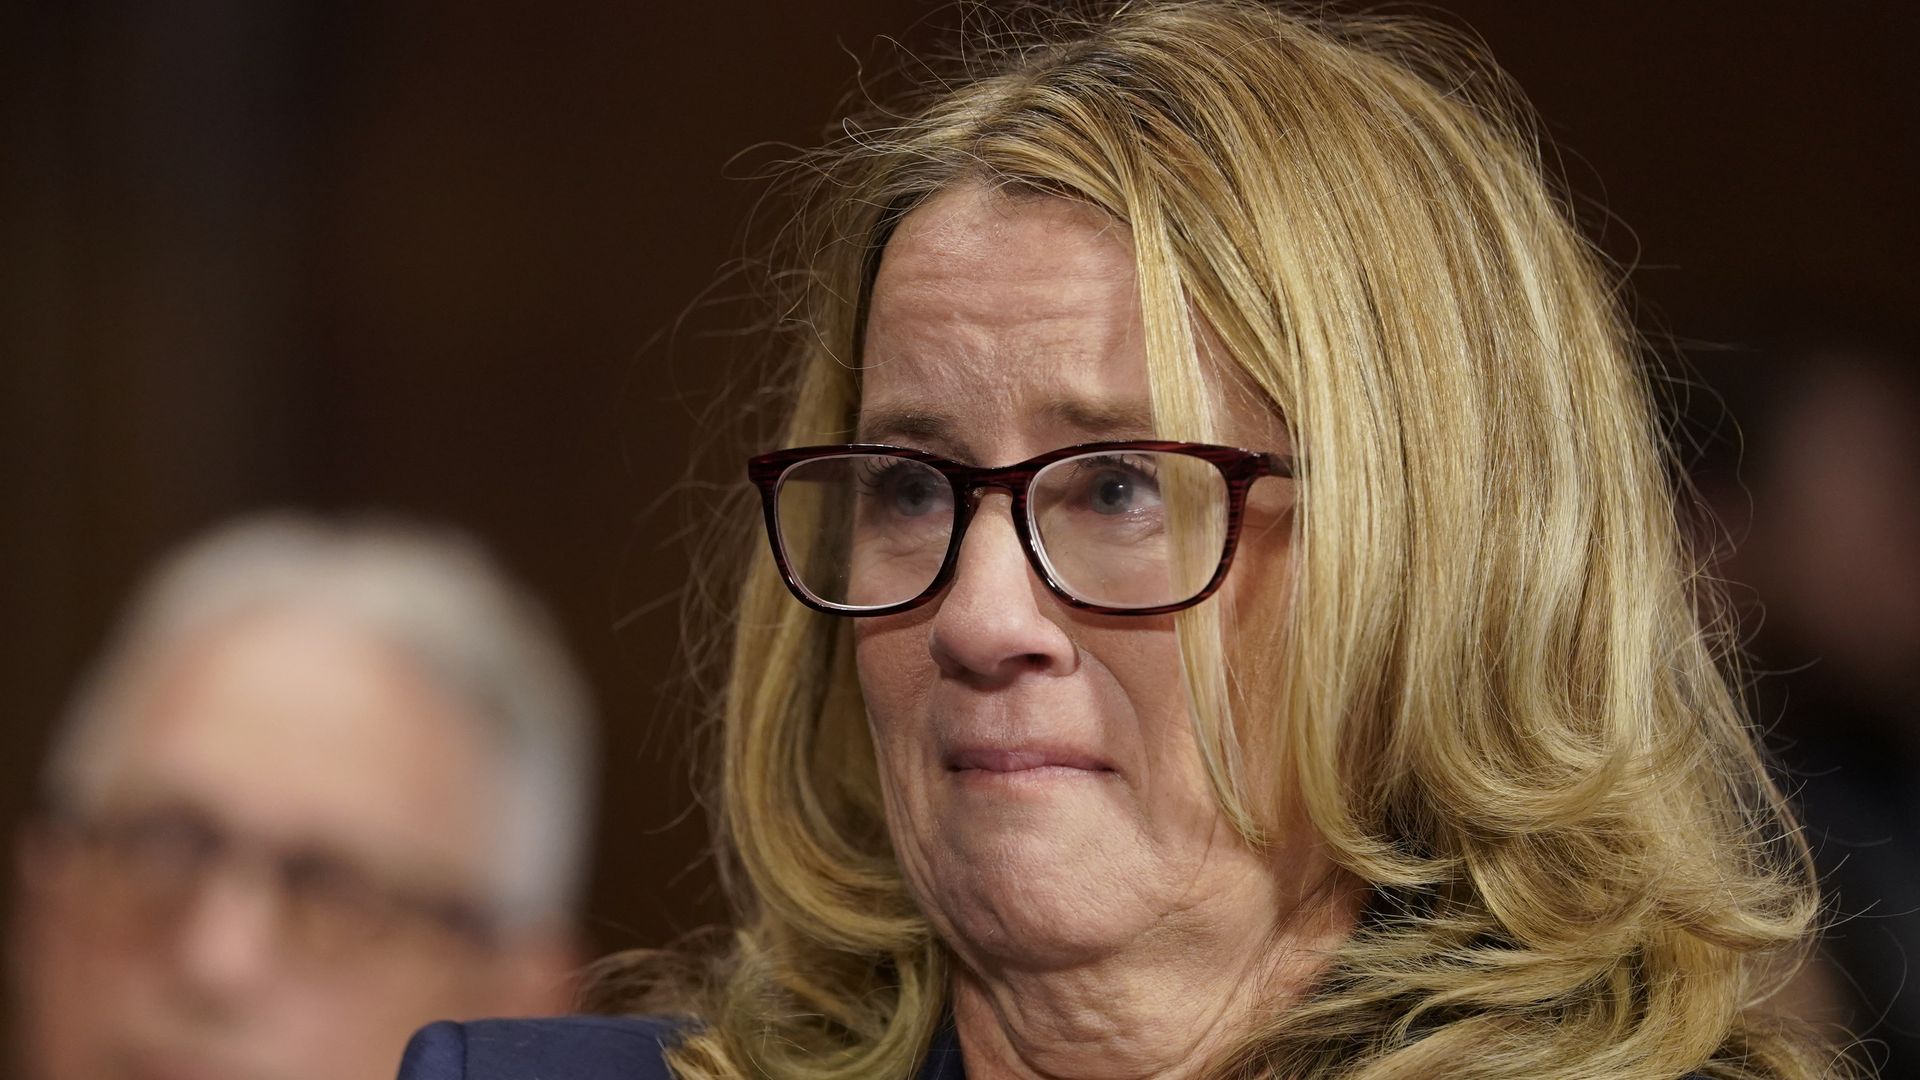 Christine Blasey Ford is still being harassed over Kavanaugh allegations